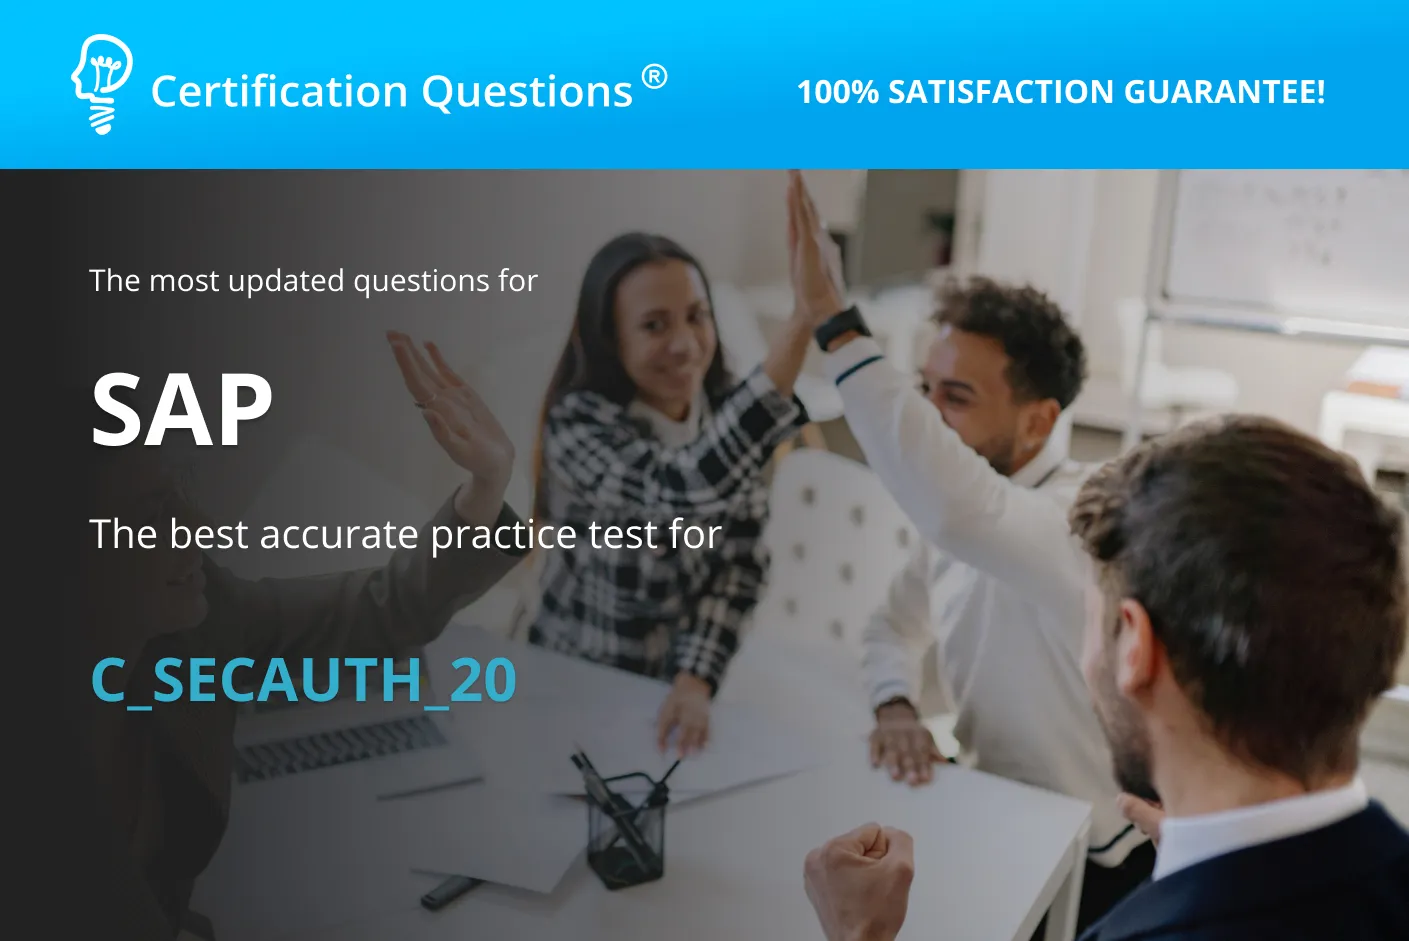 This image is related to SAP C-SECAUTH-20 Questions